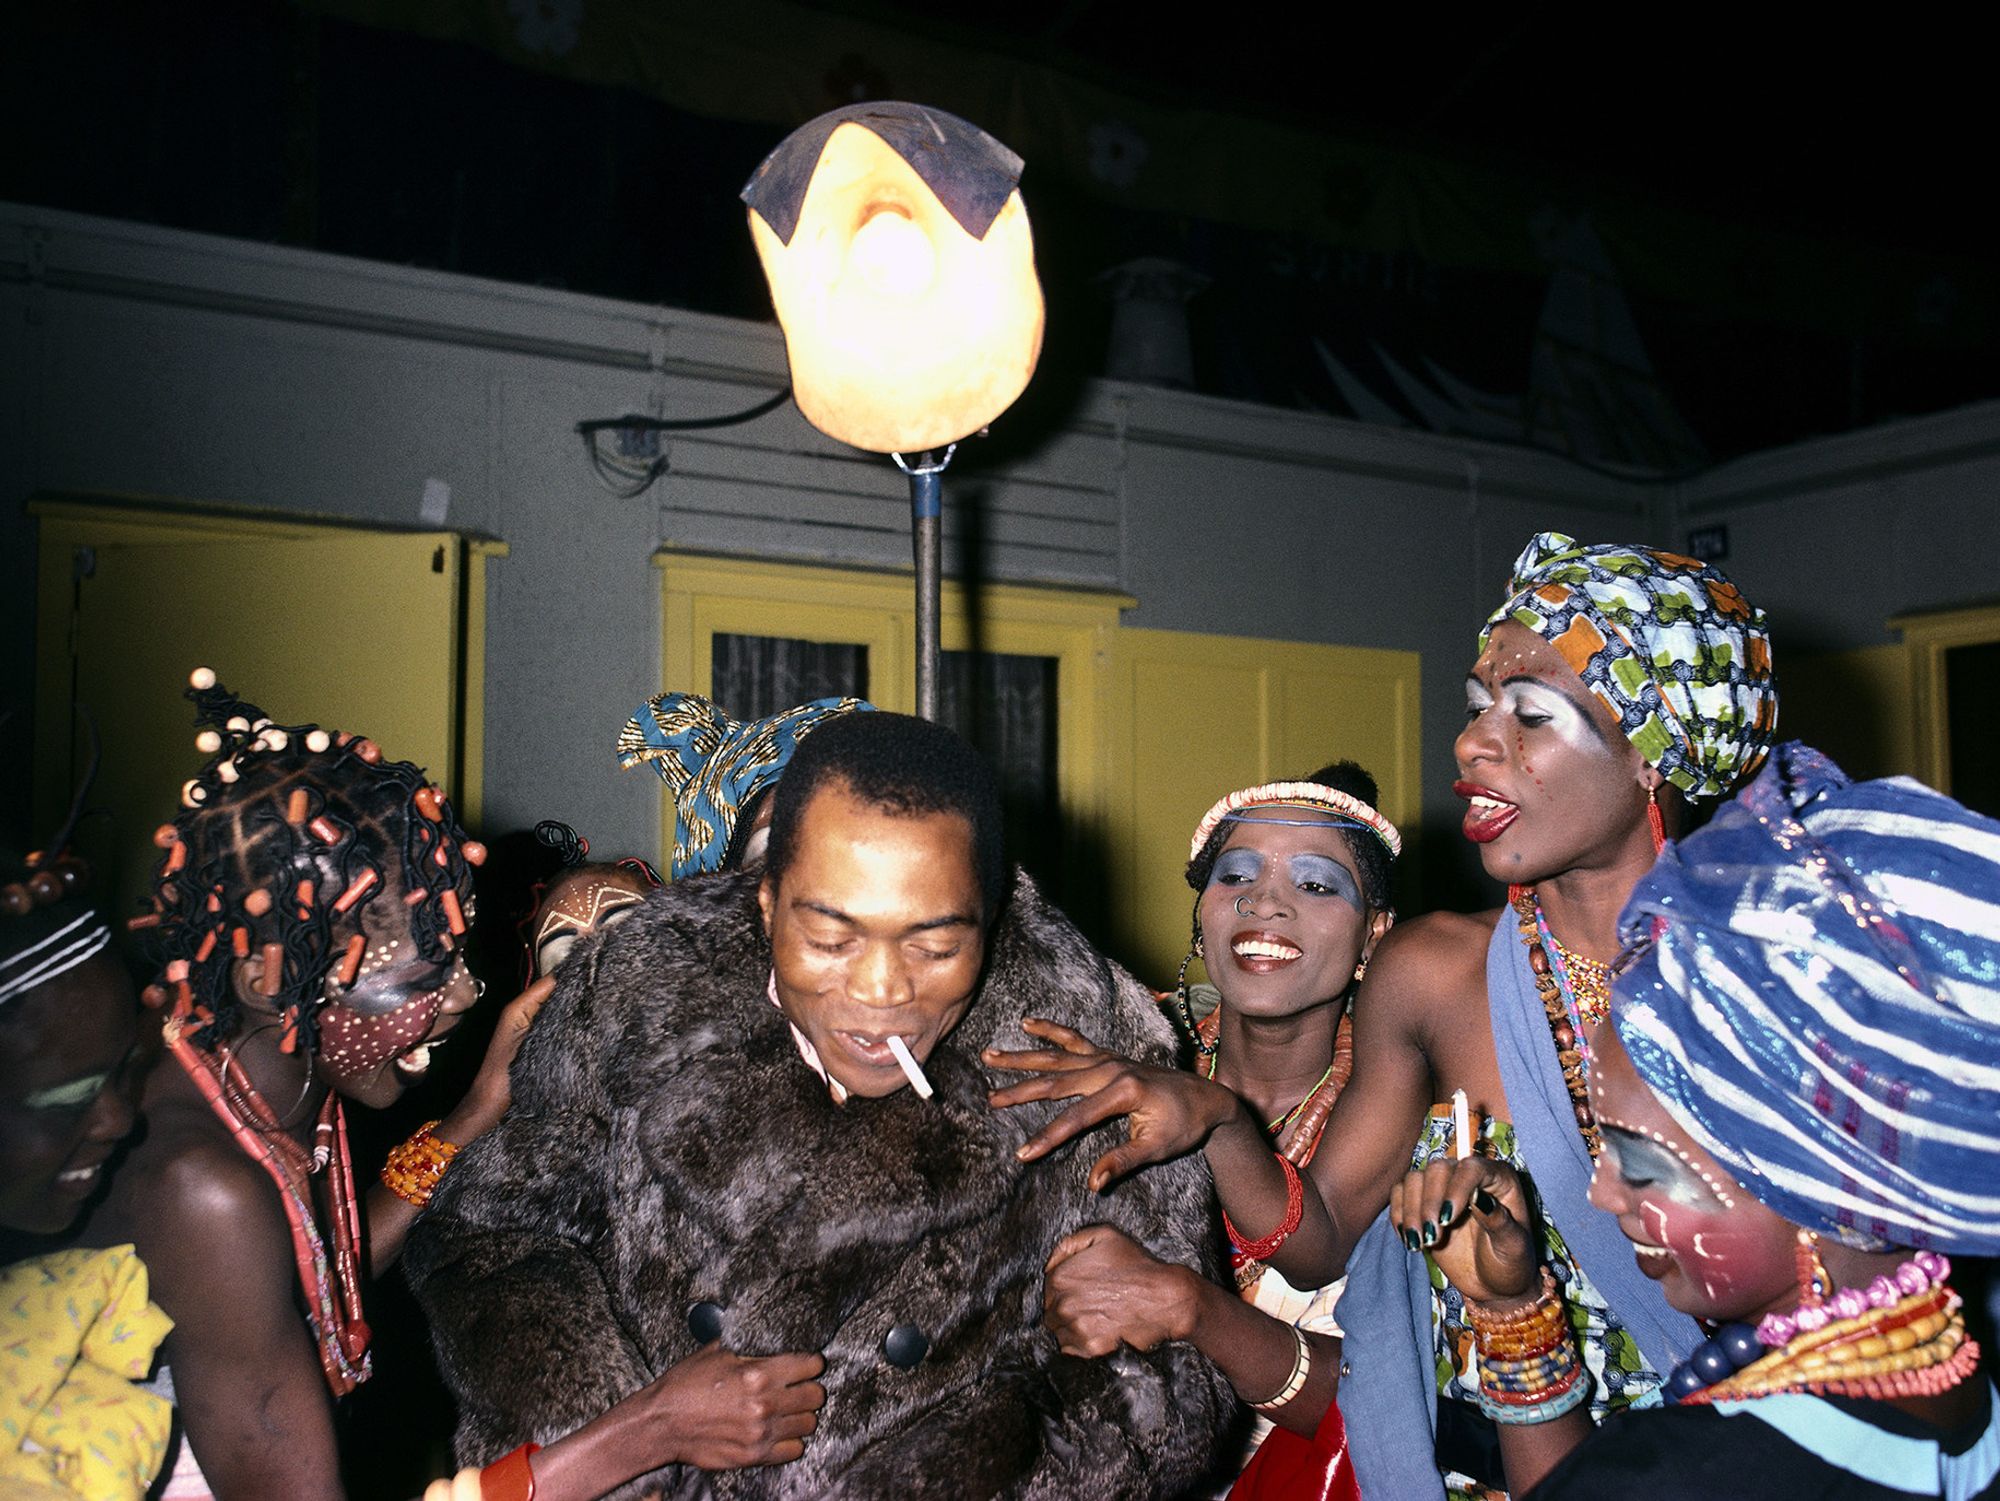 Fela Kuti in fur jacket surrounded by the Kalakuta Queens in African headwraps, facepainting and braids.